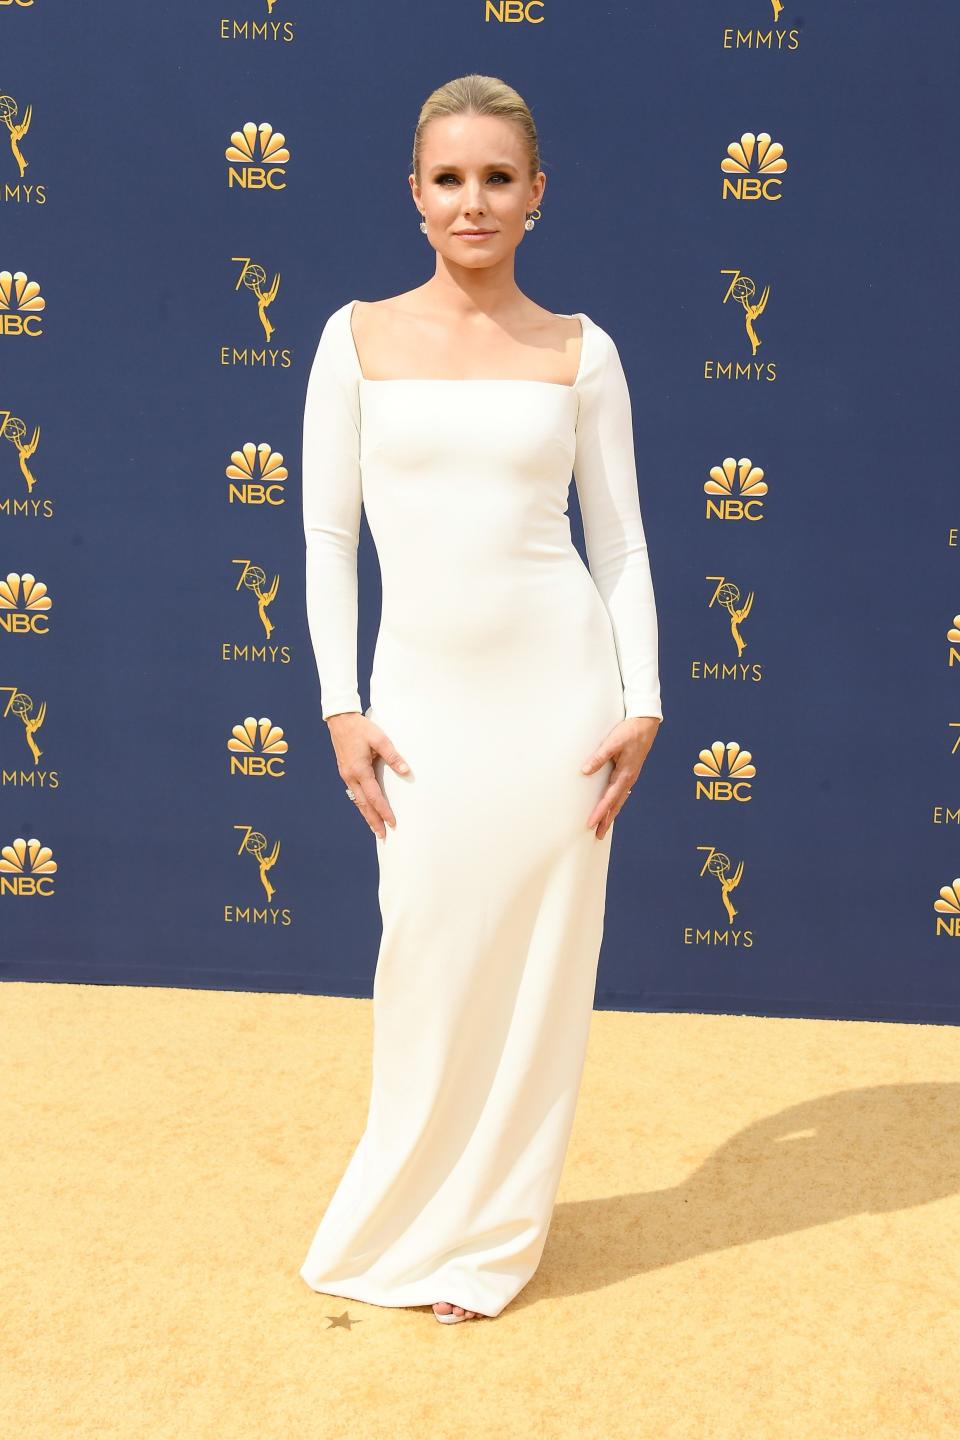 <p>The 70th Emmy Awards have arrived! As stars appeared on the red (golden) carpet, they certainly weren't short of glamorous looks. Here, we've rounded up the most elaborate ensembles from the evening.</p>